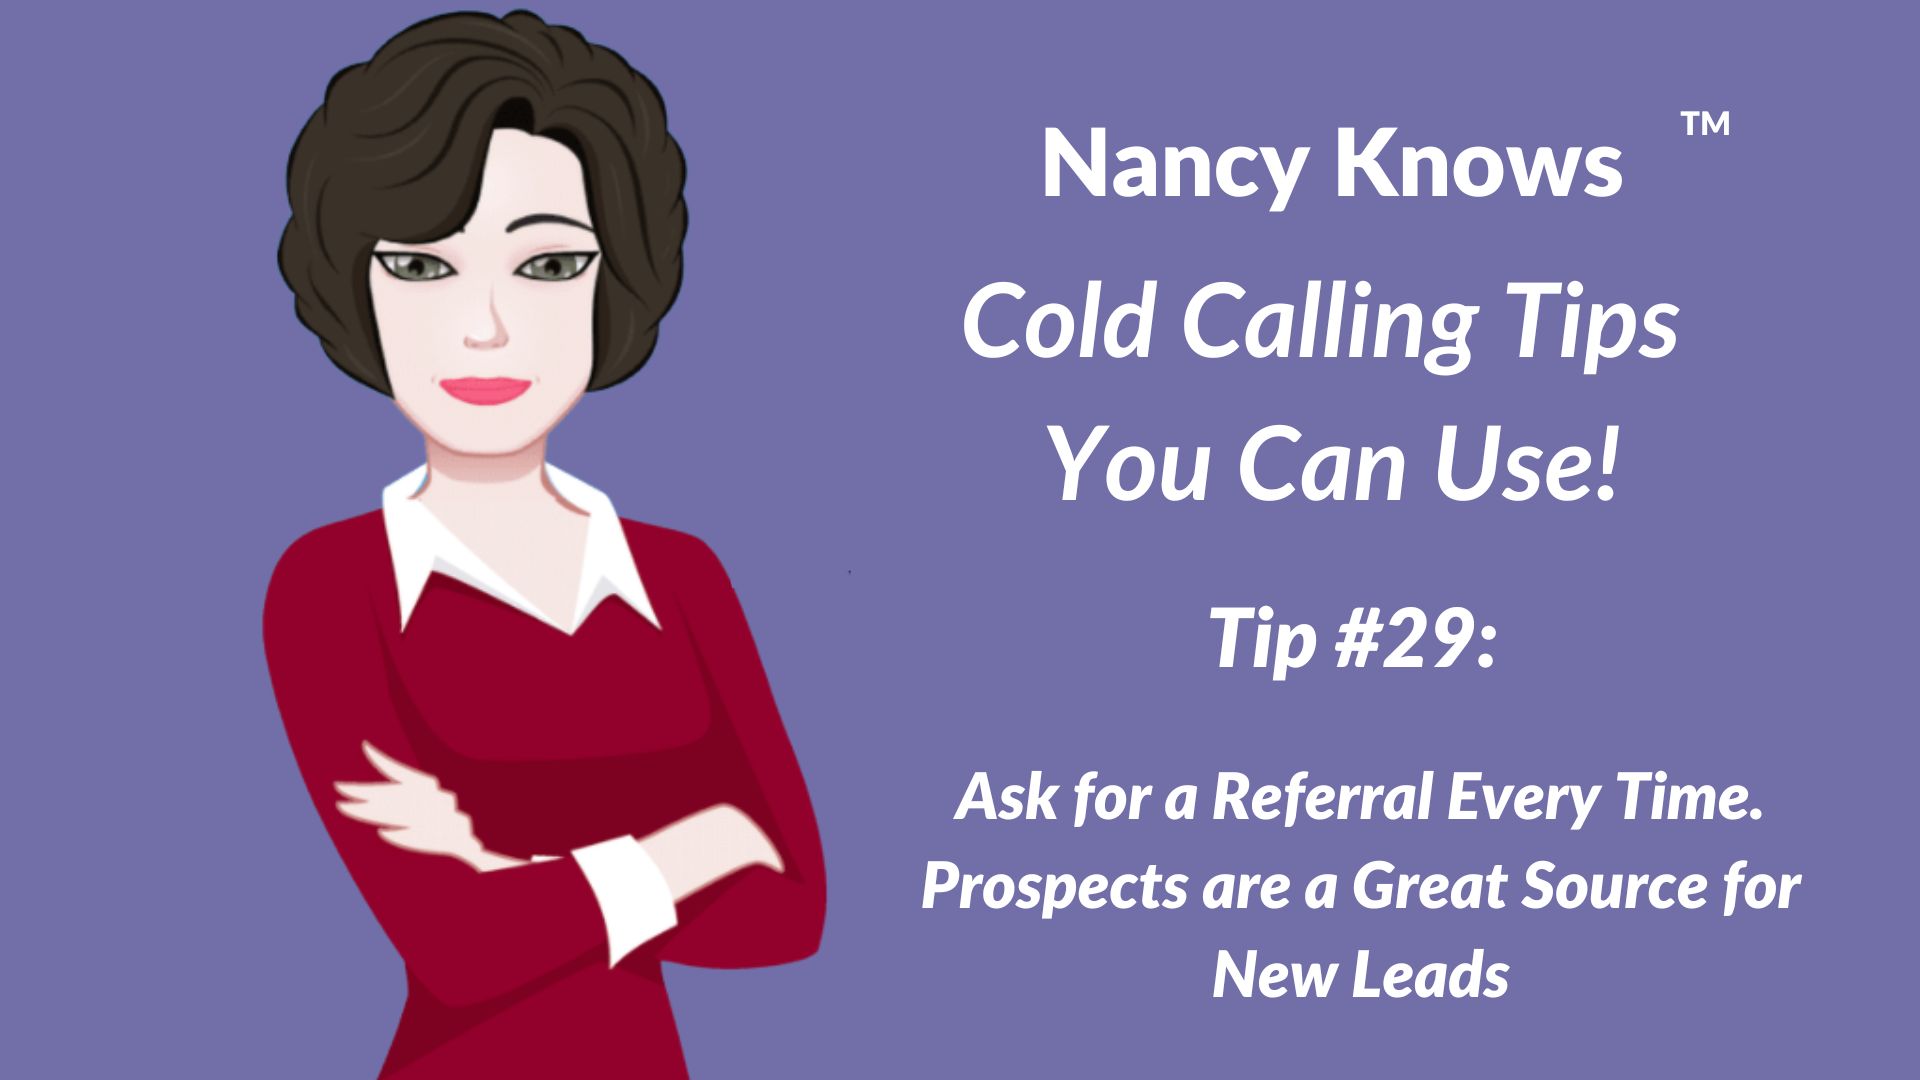 Nancy Knows #29: Ask for a Referral Every Time. Prospects are a Great Source for New Leads